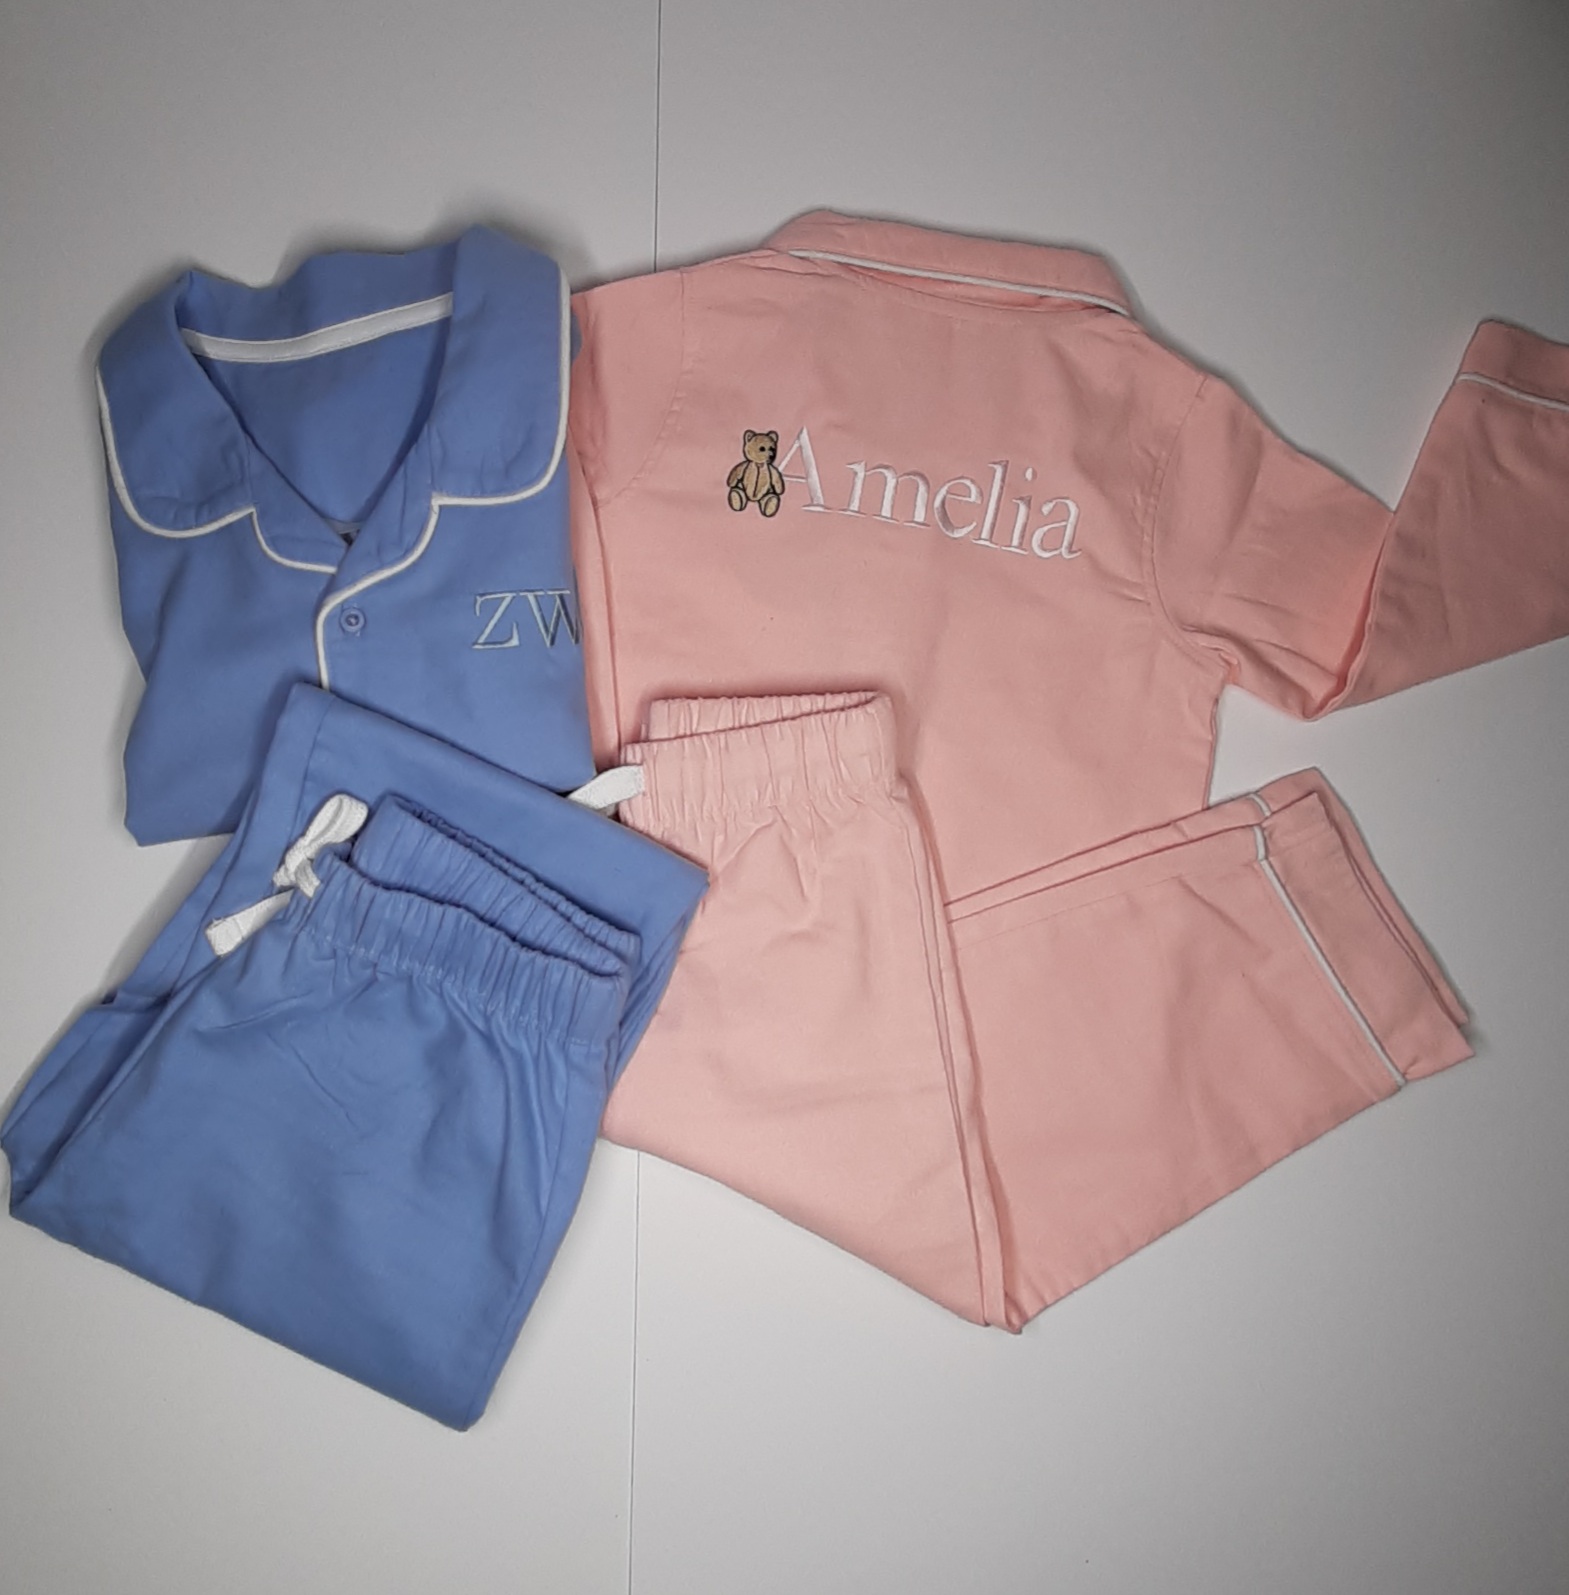 classic children's pjs in dusky pink and blue. with embroidered name and initials personalised